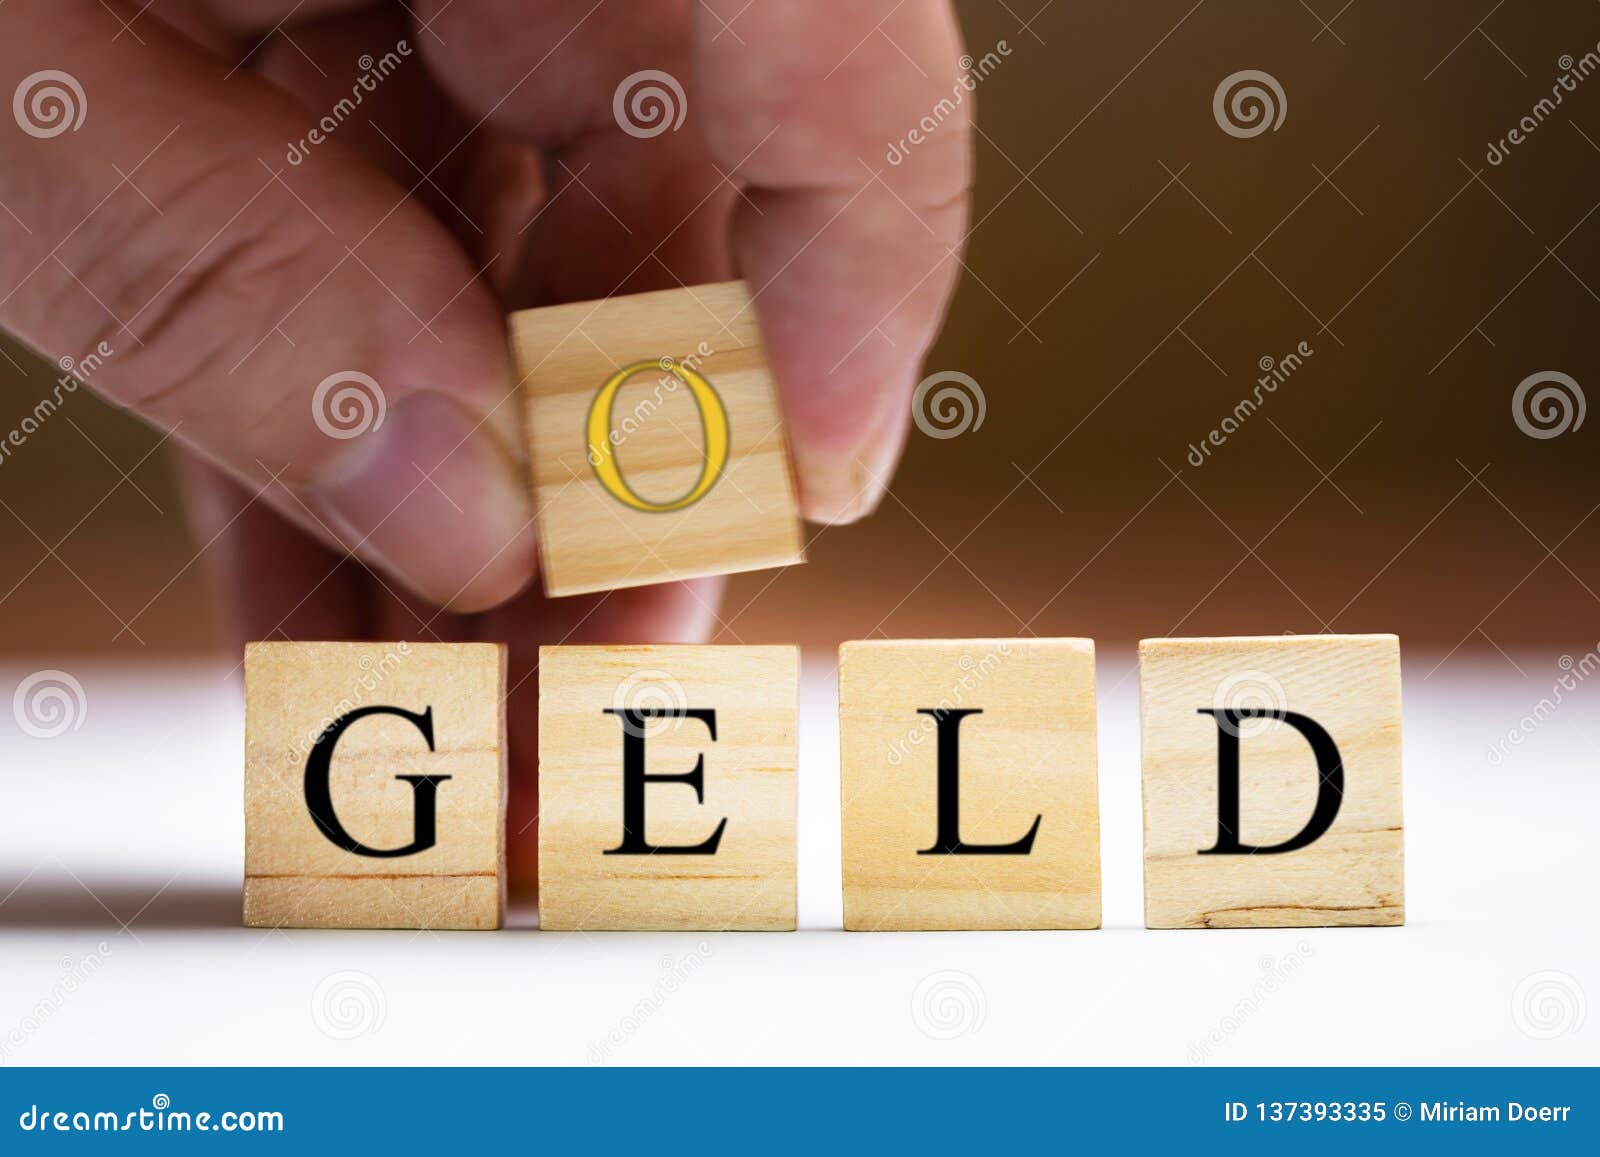 concept investment, gold trading gold to make money, geld means in german money